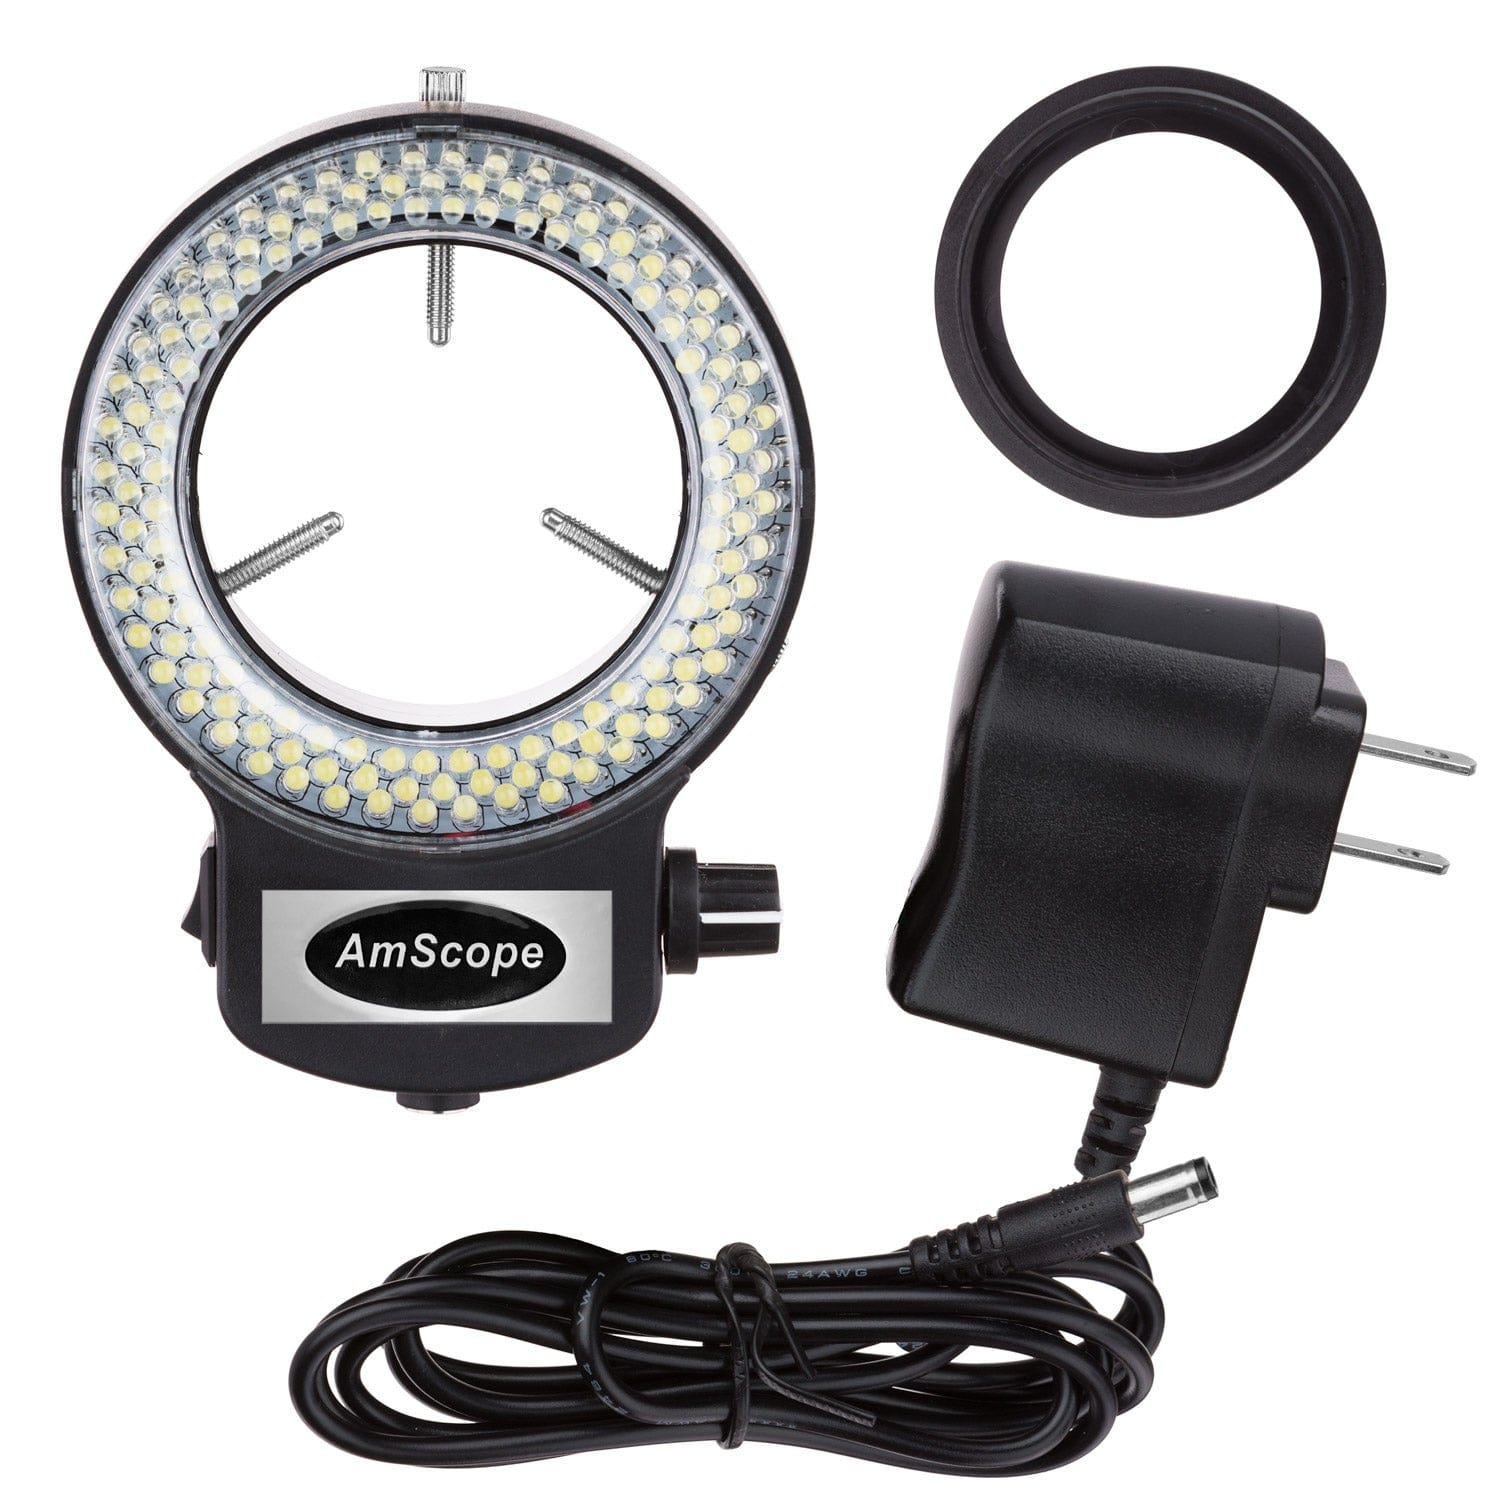 144 LED Adjustable Compact Microscope Ring Light + Adapter with